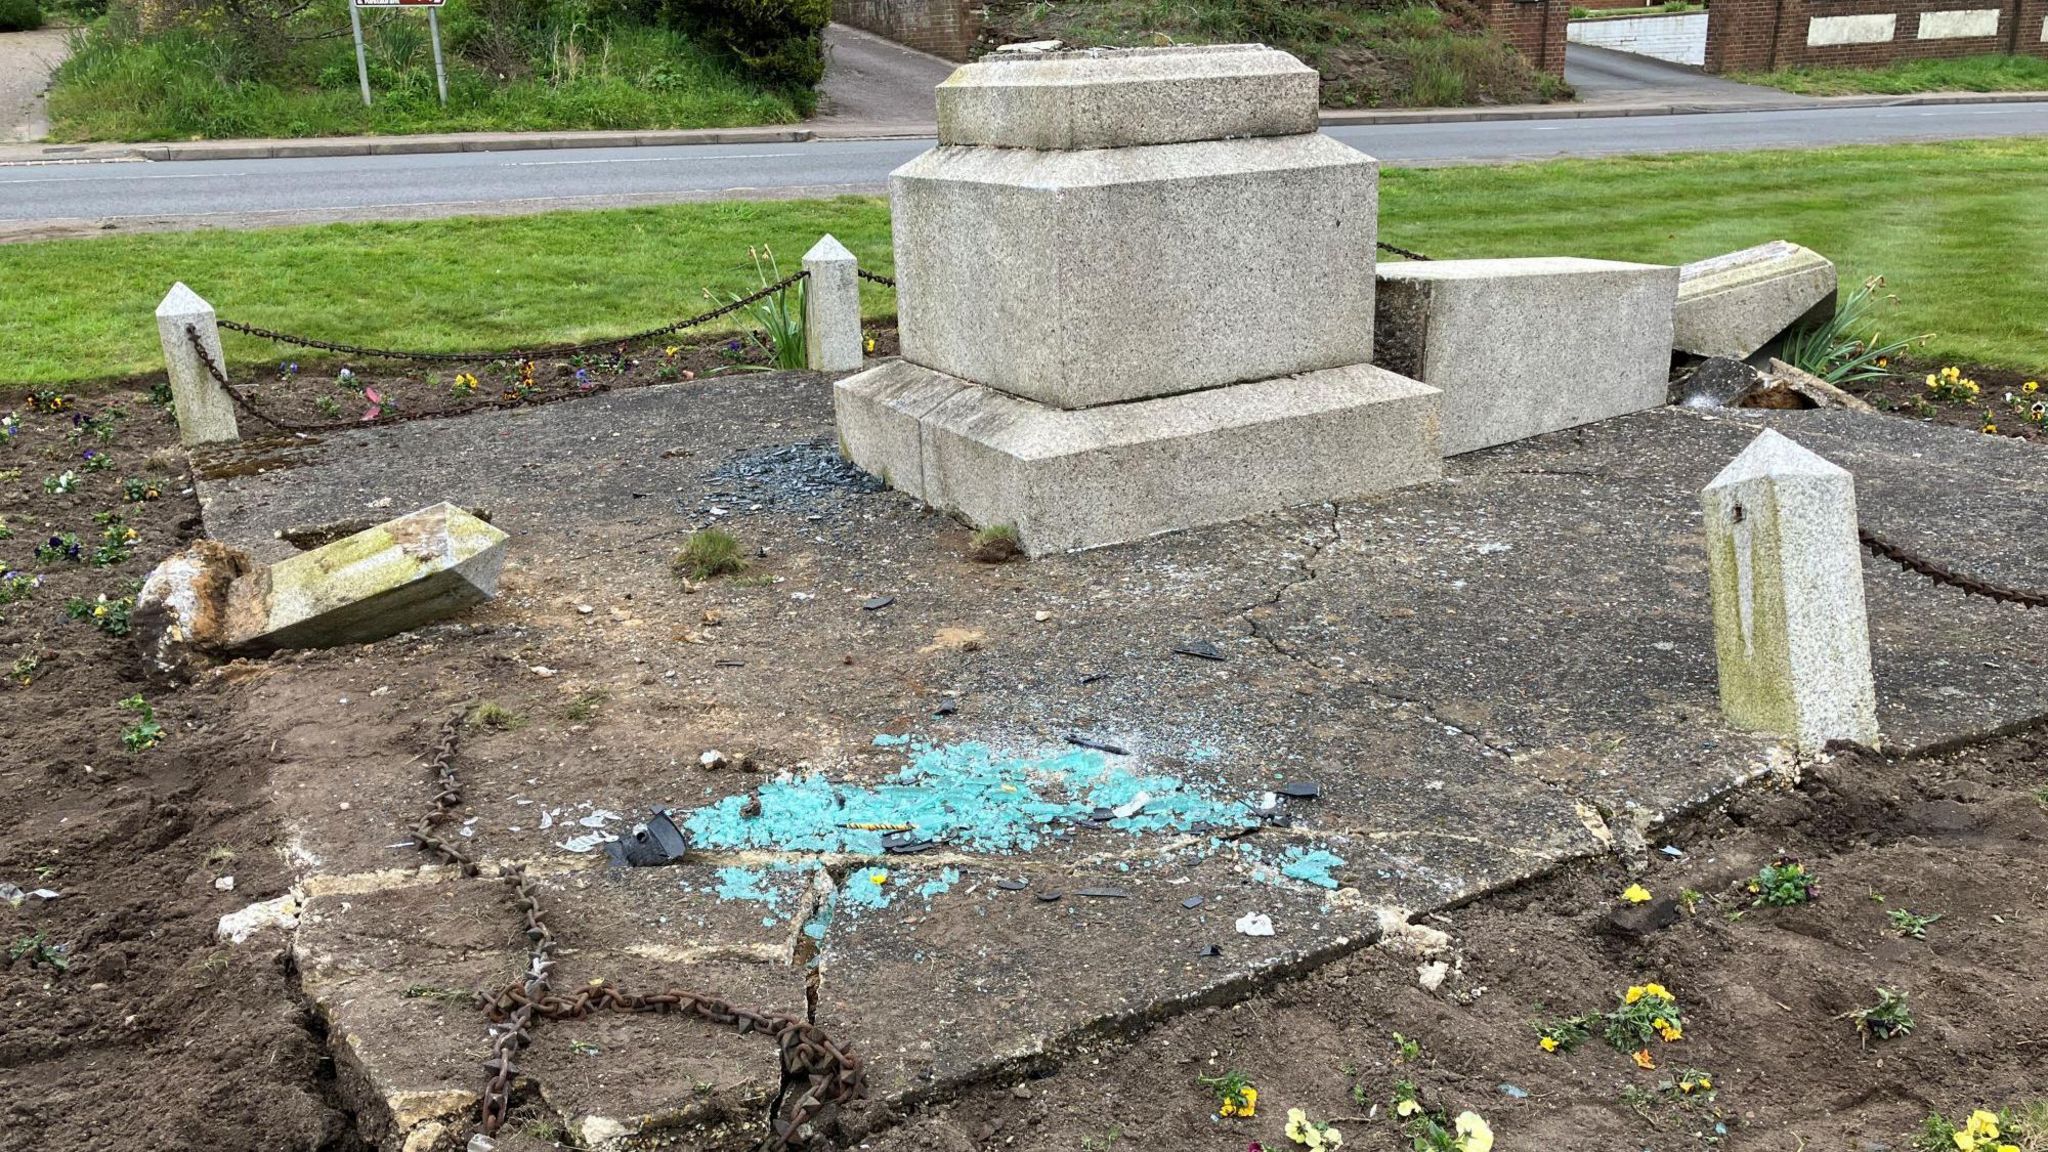 The damaged memorial with broken glass in front of it